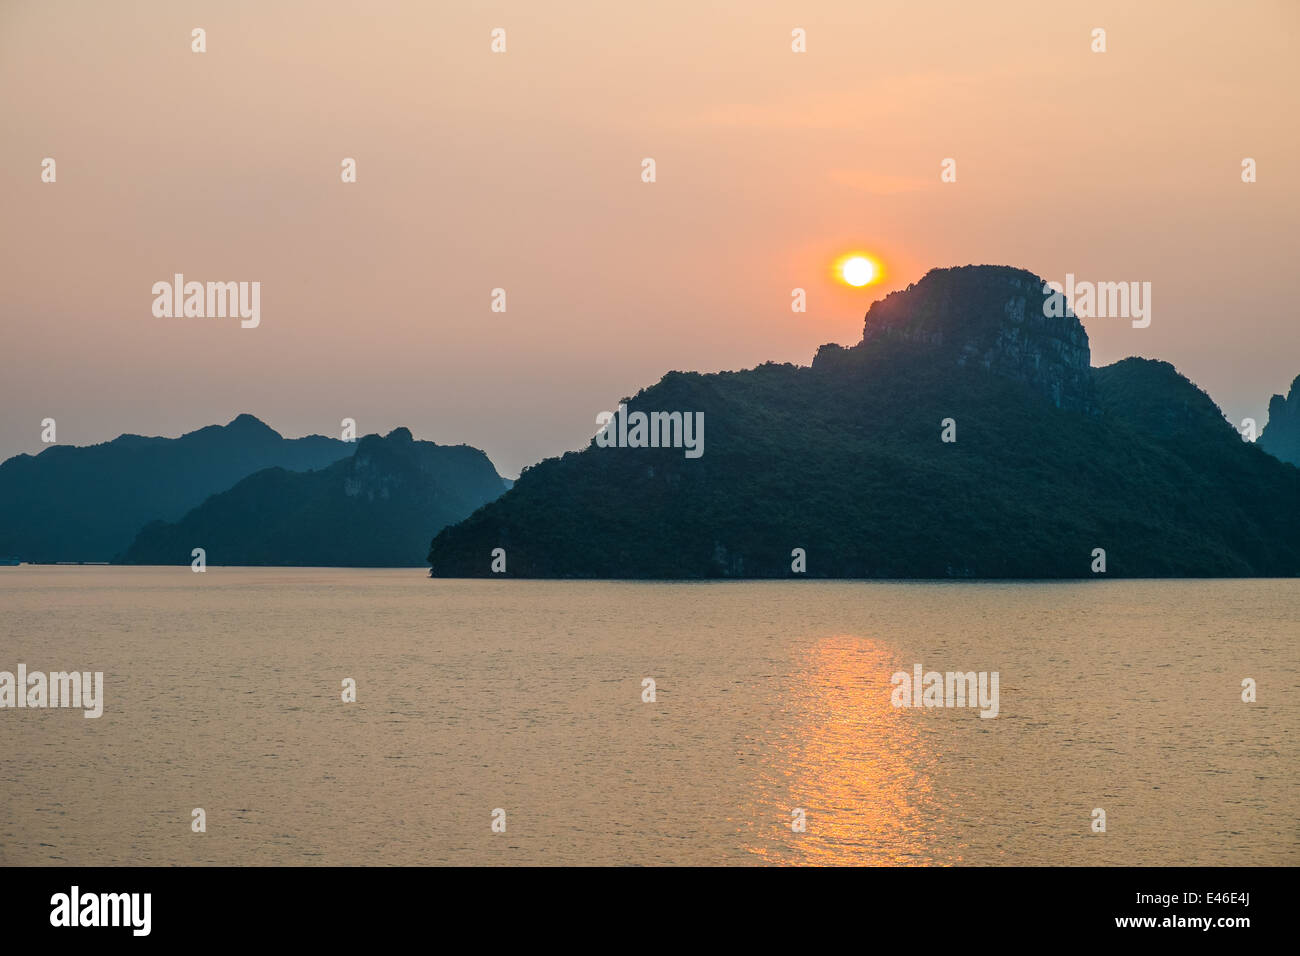 Sunset over mountains and sea, Halong Bay, Vietnam Stock Photo